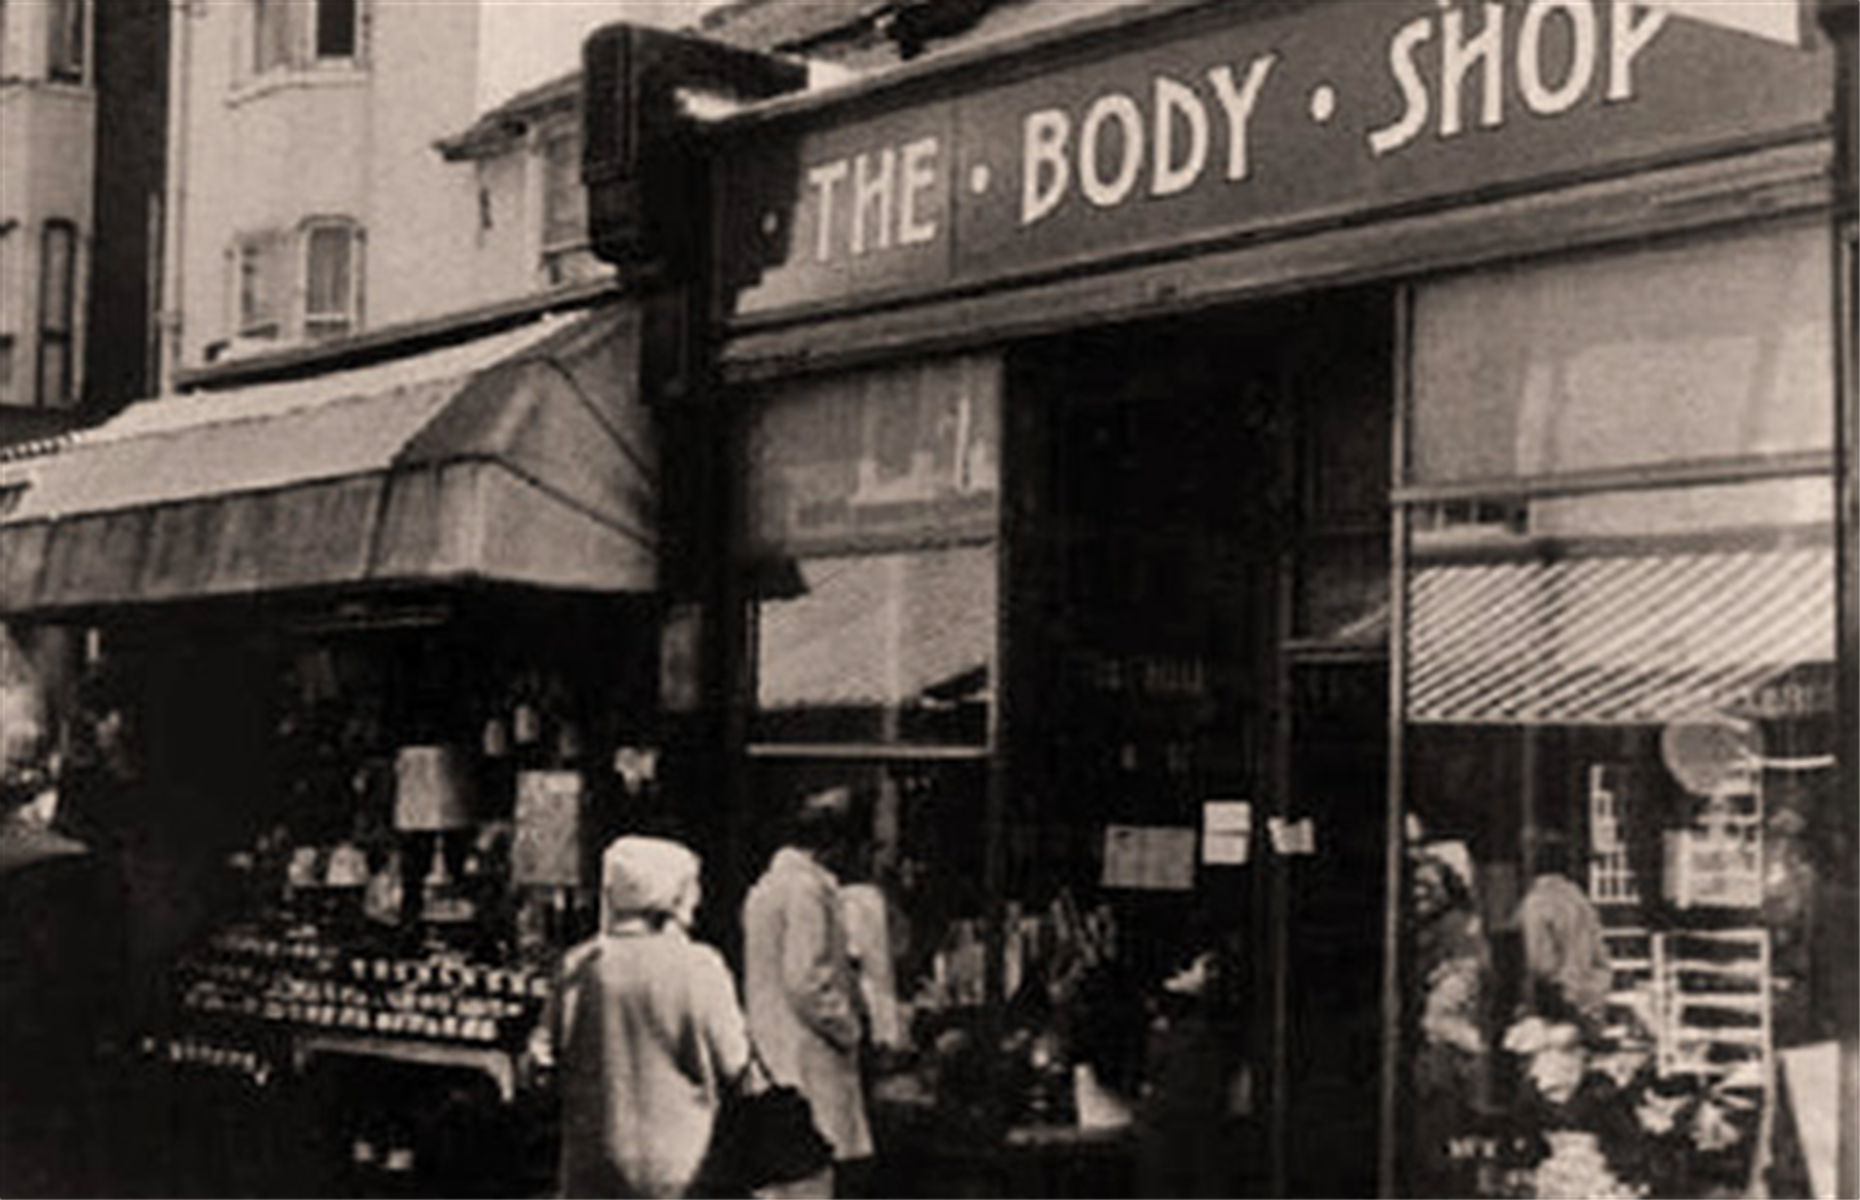 1976 – The Body Shop